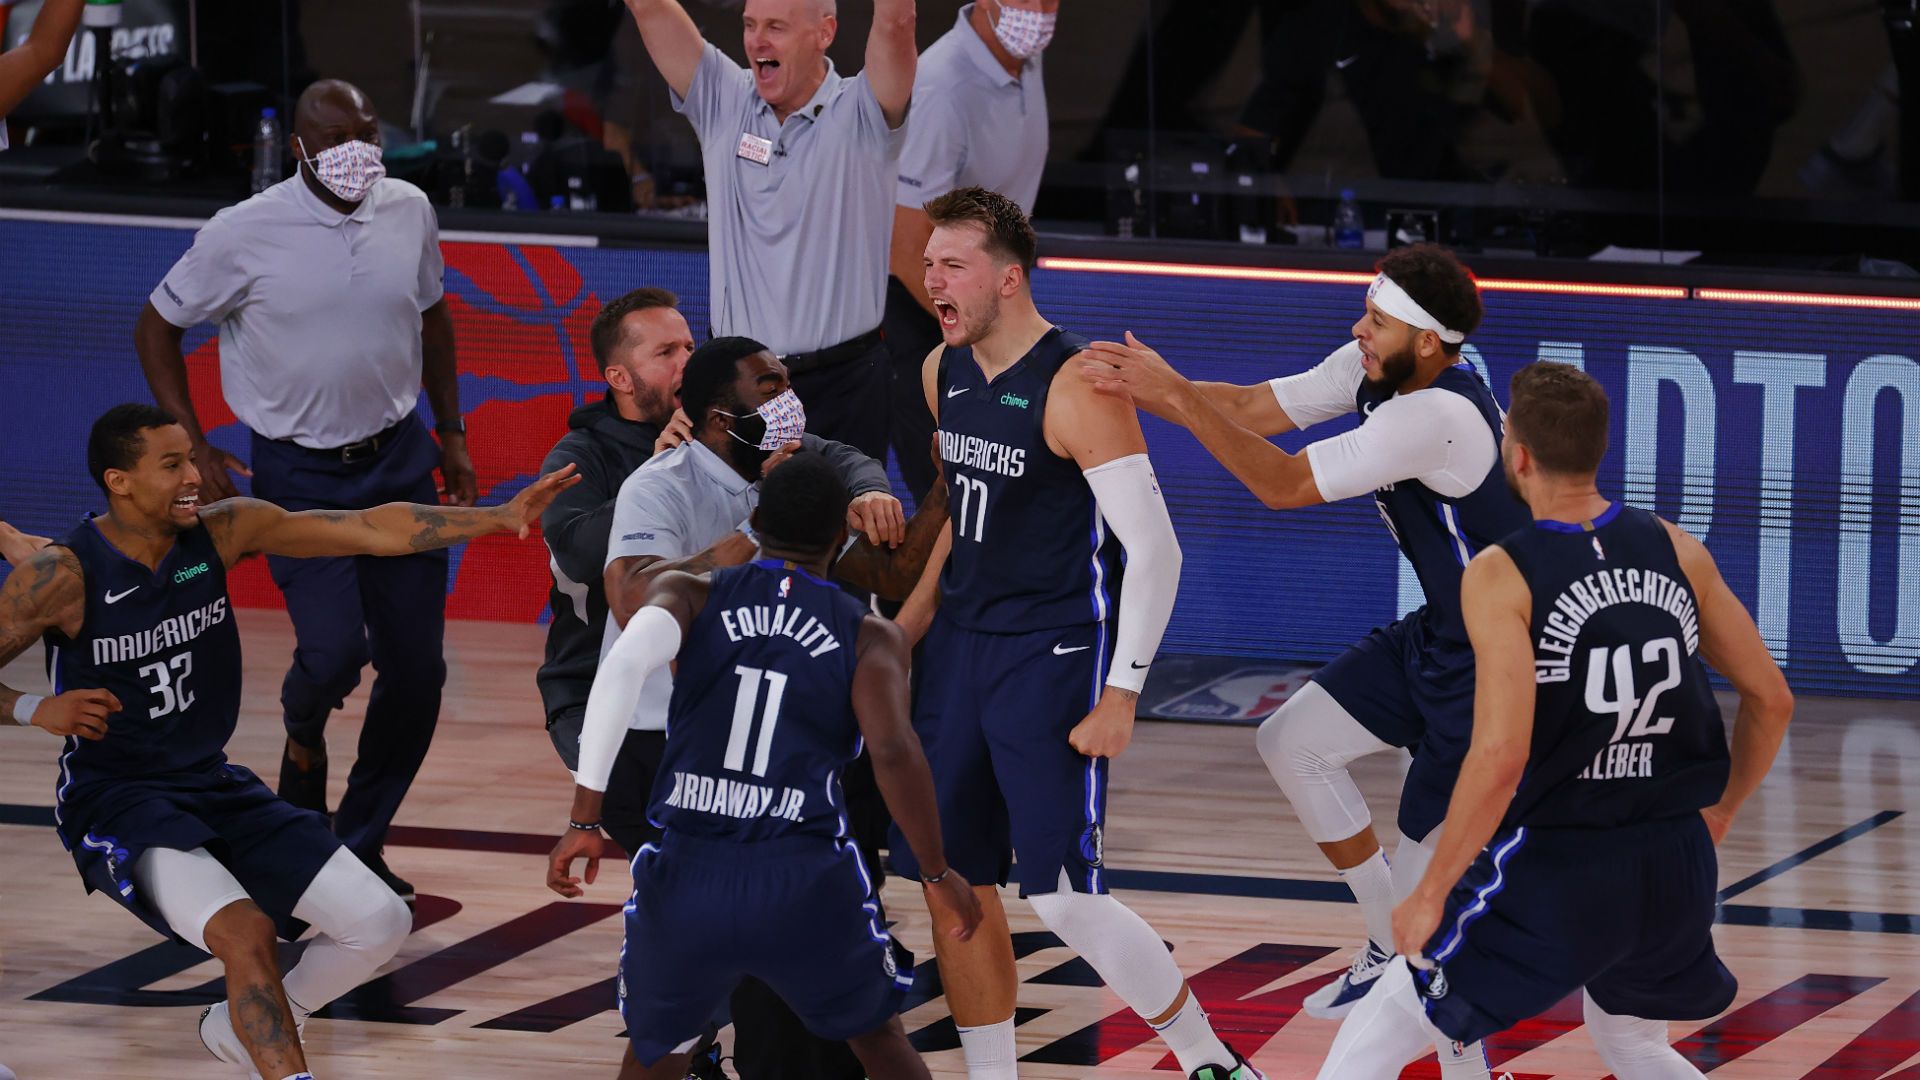 NBA Playoffs 2020: Luka Doncic Caps Off Legendary Performance With Game Winner To Tie Series. NBA.com India. The Official Site Of